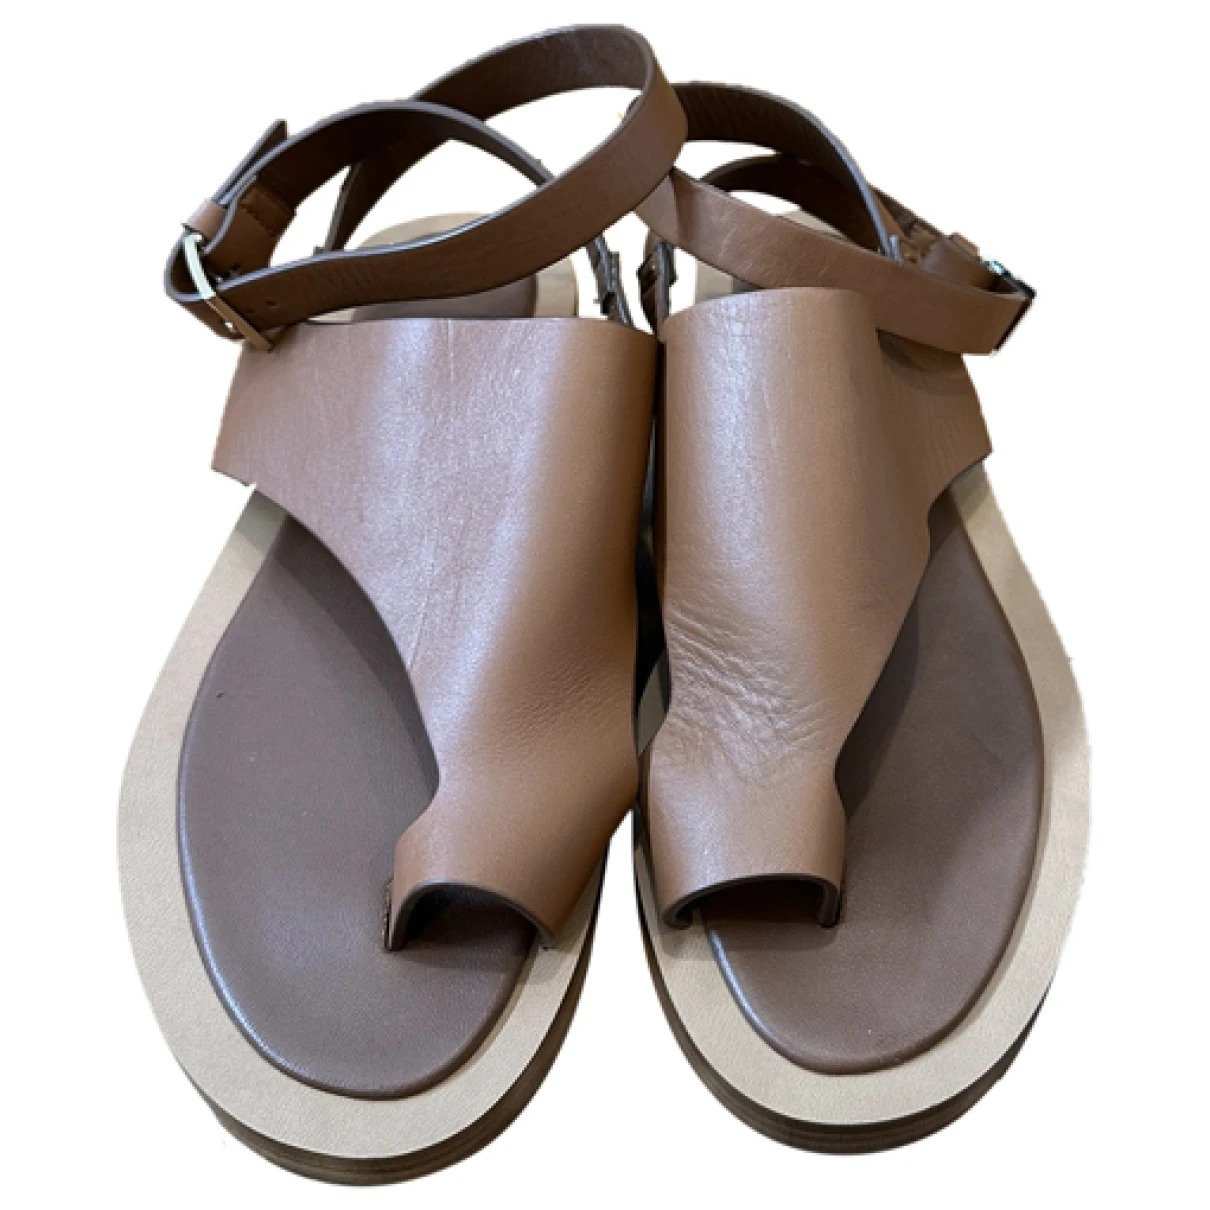 shoes Max Mara sandals for Female Leather 38 EU. Used condition